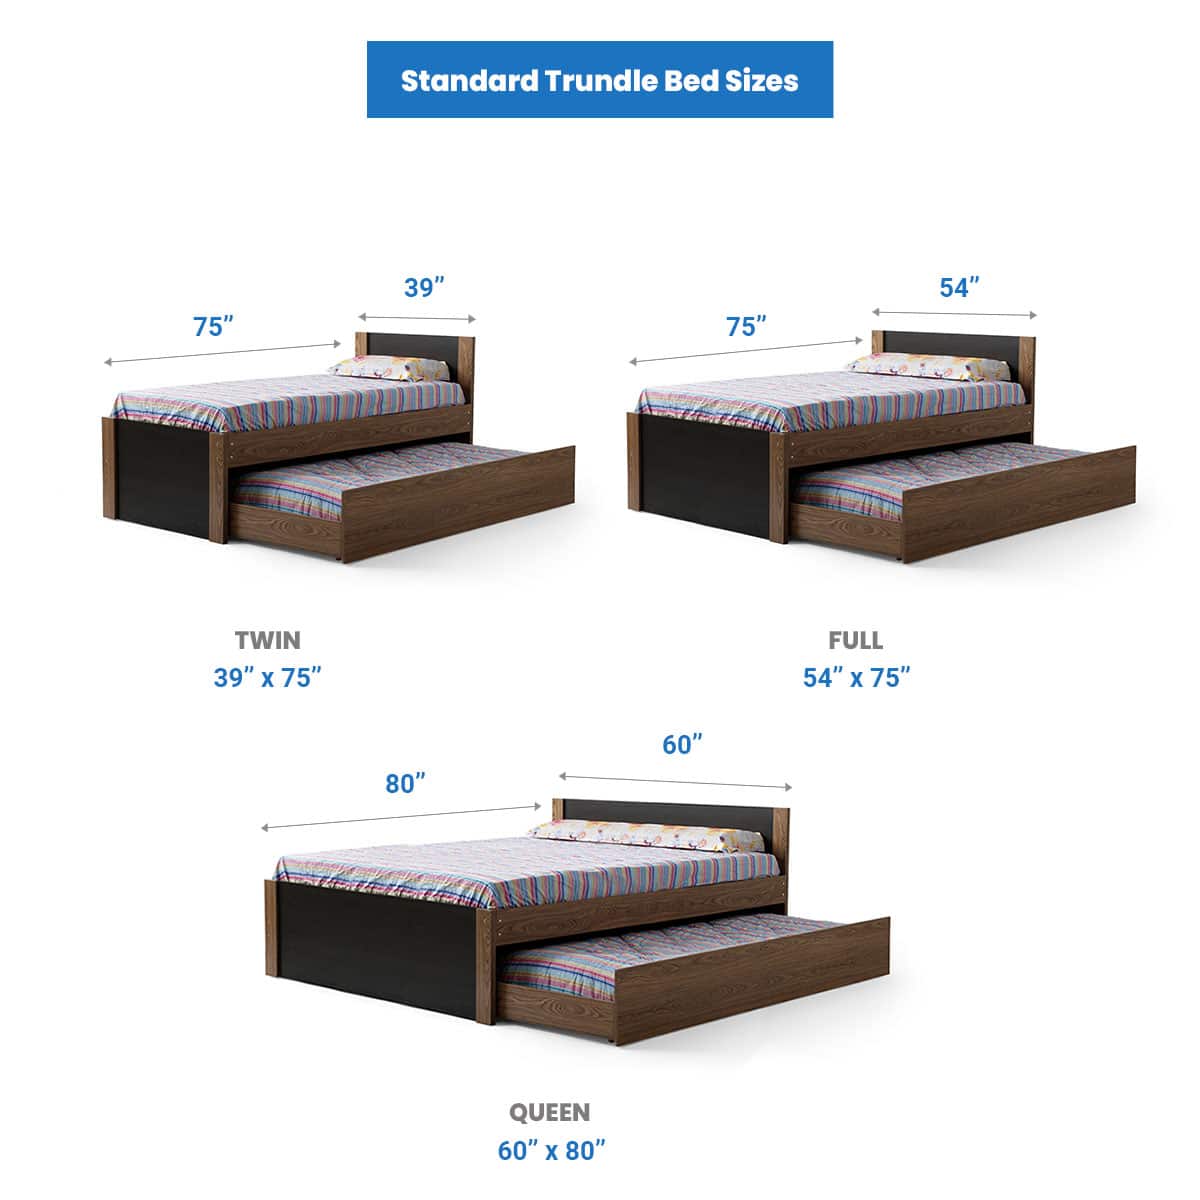 Standard trundle bed sizes